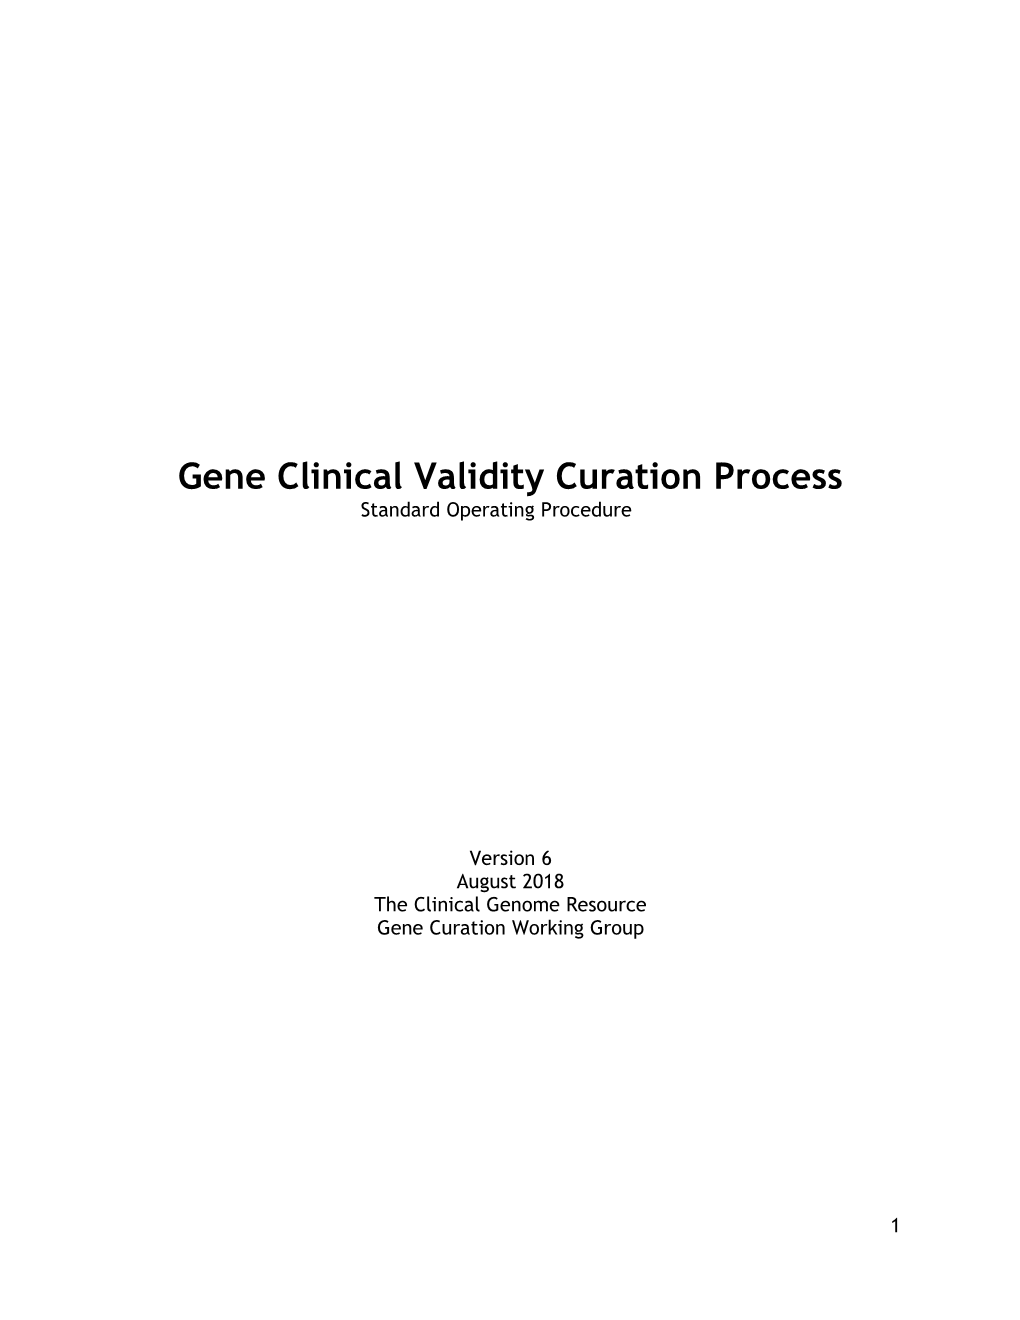 Gene Clinical Validity Curation Process Standard Operating Procedure